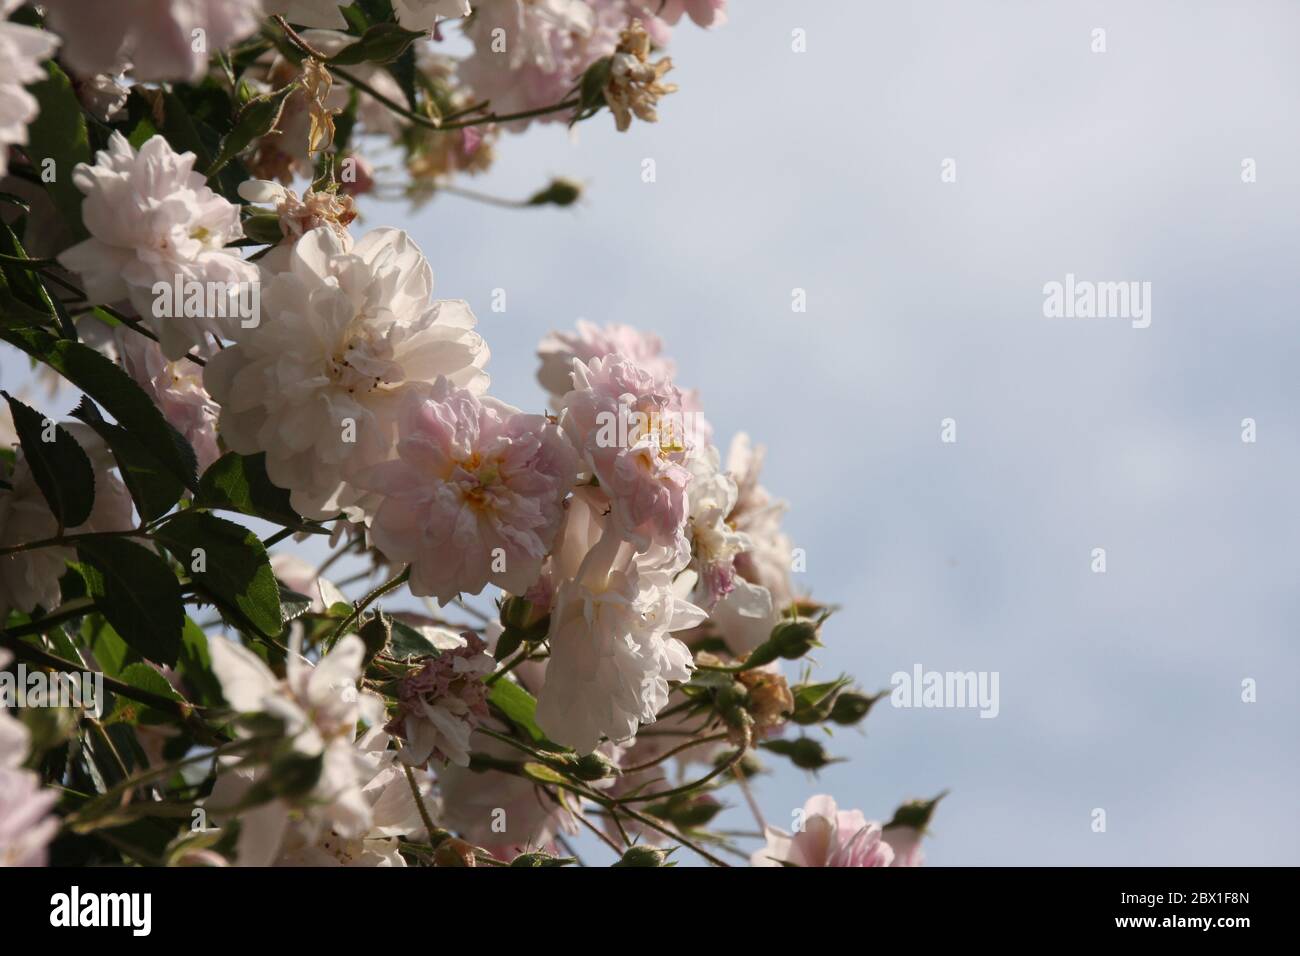 Close up of pale pink blossoms of rambler or climbing roses against pale blue sky on blurred background Stock Photo